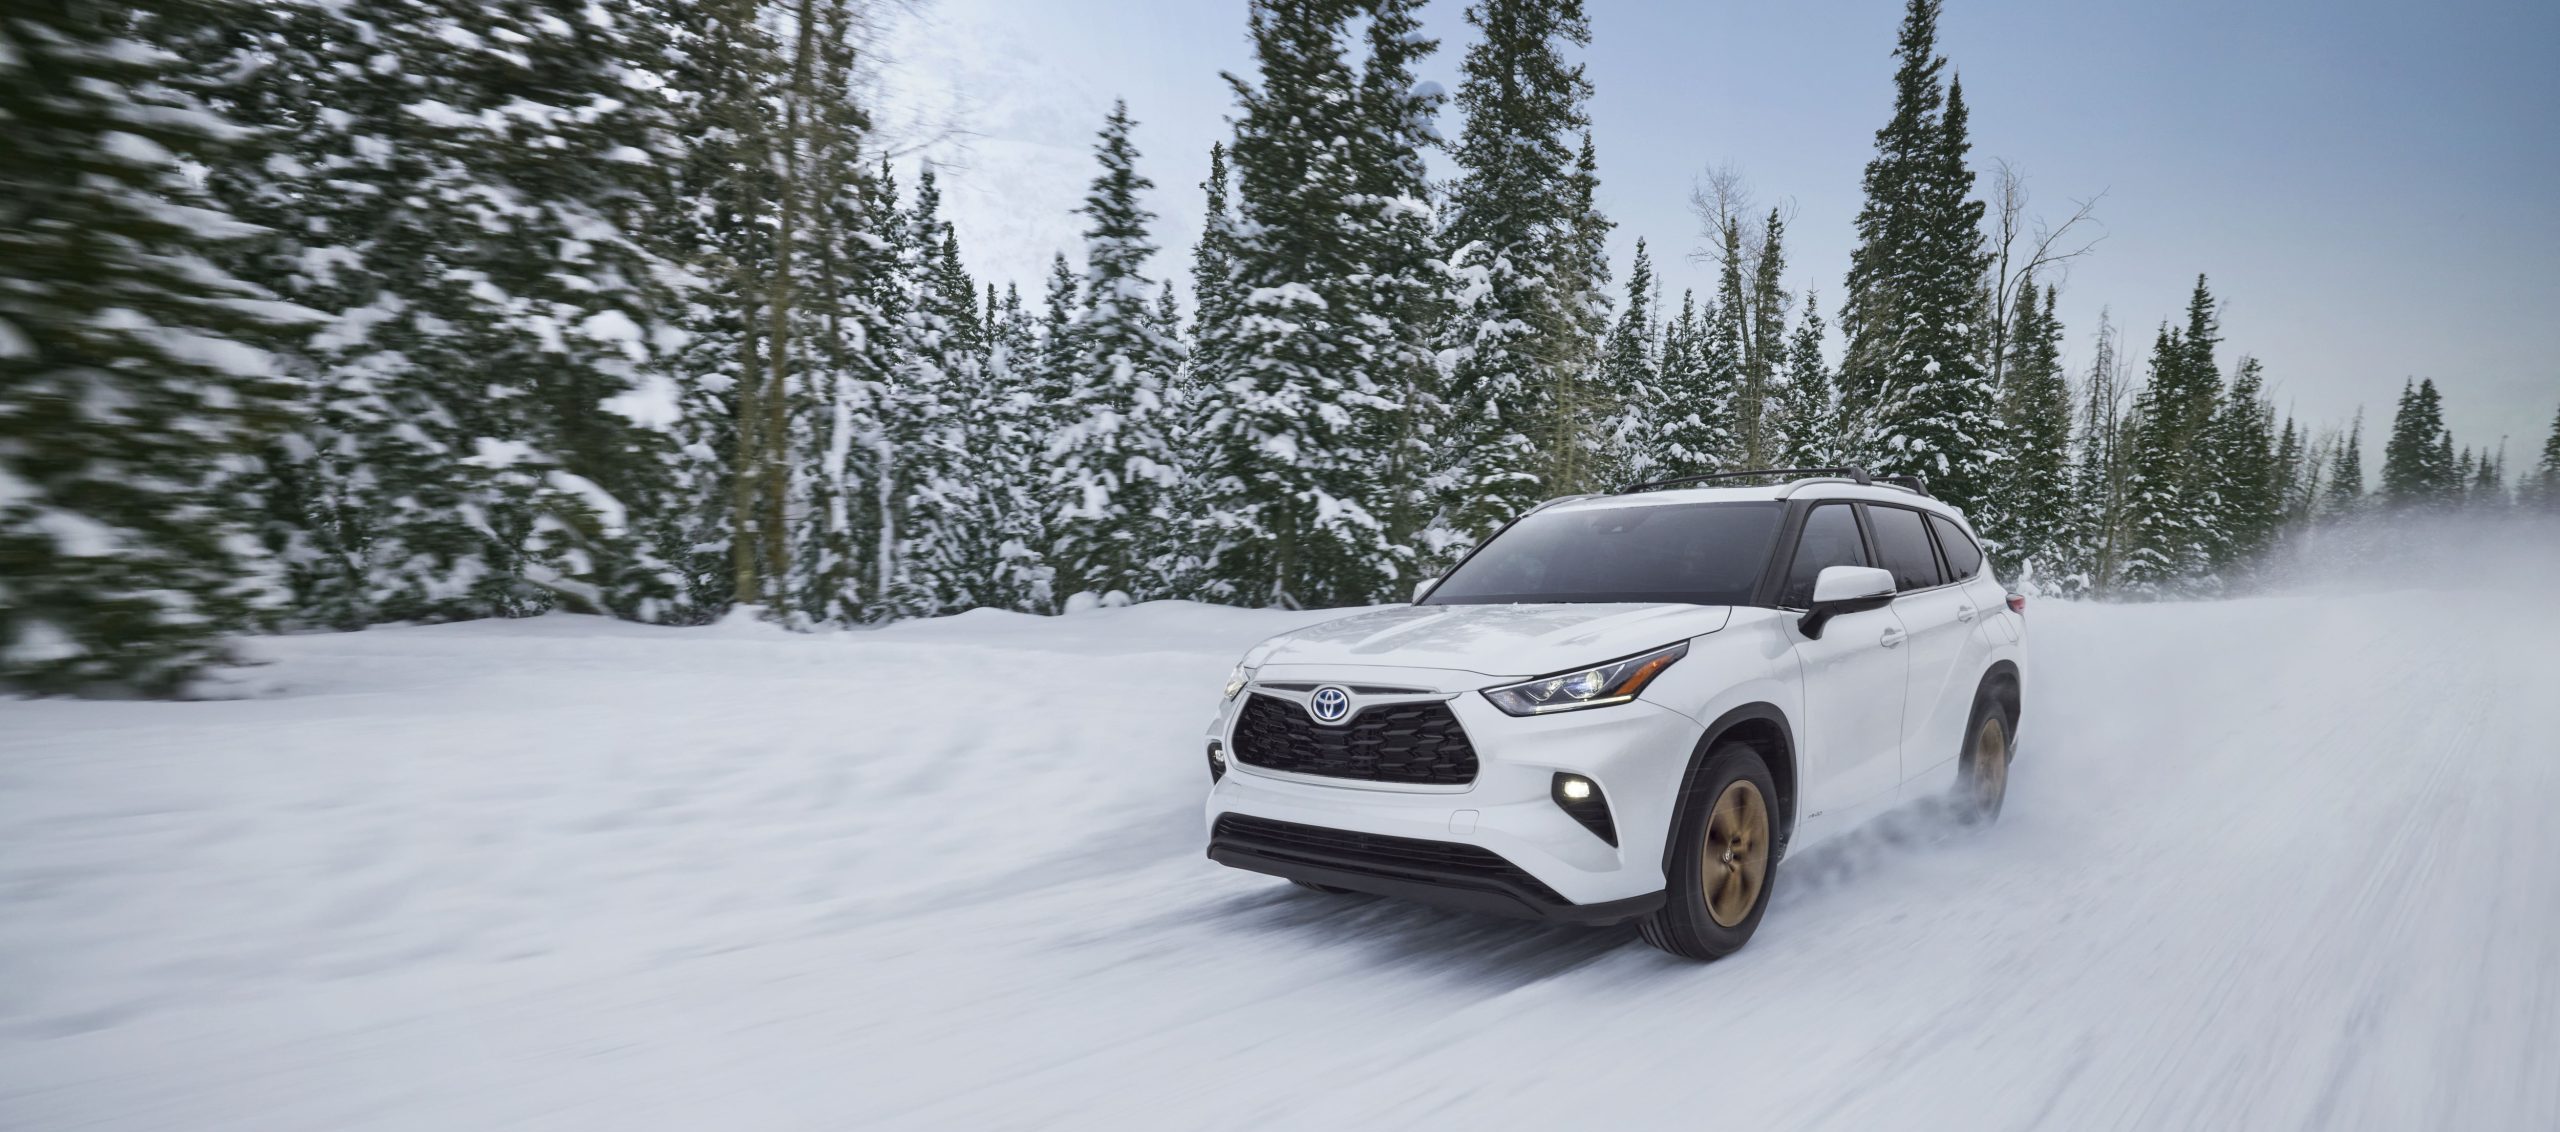 Toyota Highlander in SNOW mode for skiing